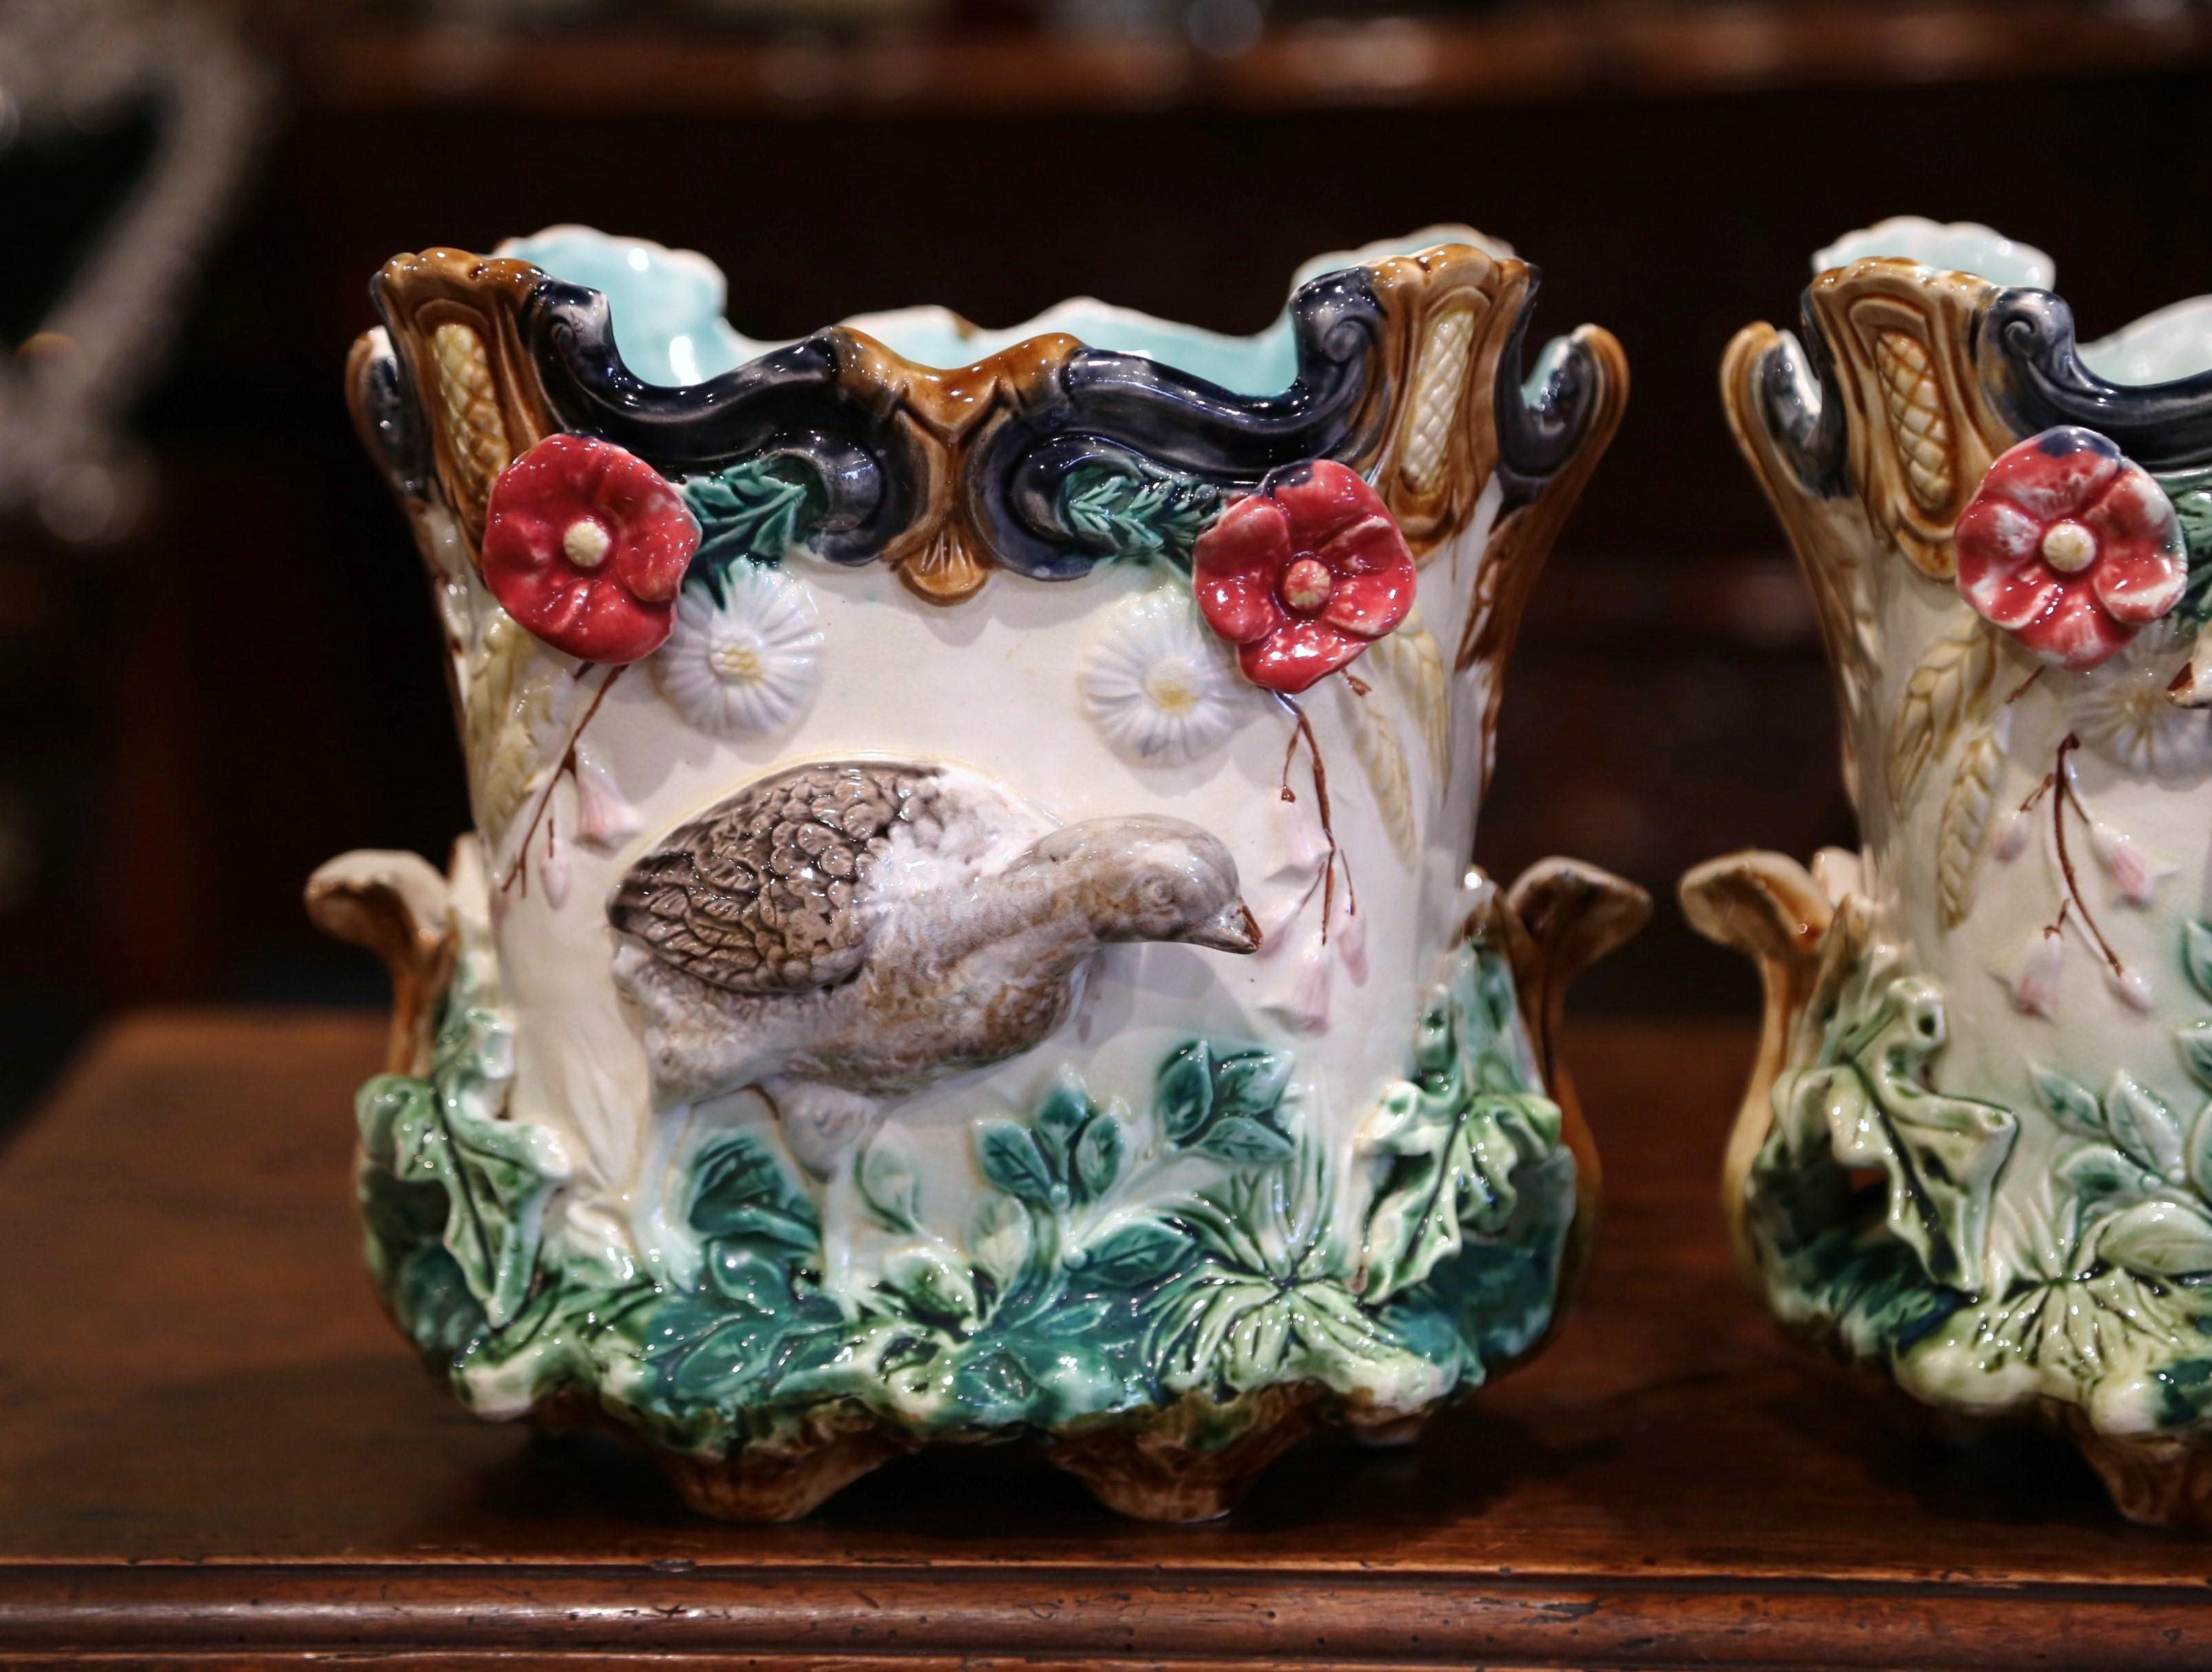 This pair of colorful, hand painted Majolica jardinières was sculpted in France, circa 1870. The antique planters are almost square in shape with scalloped decor around the edges. Each porcelain cachepot features exquisitely rendered hunt and floral